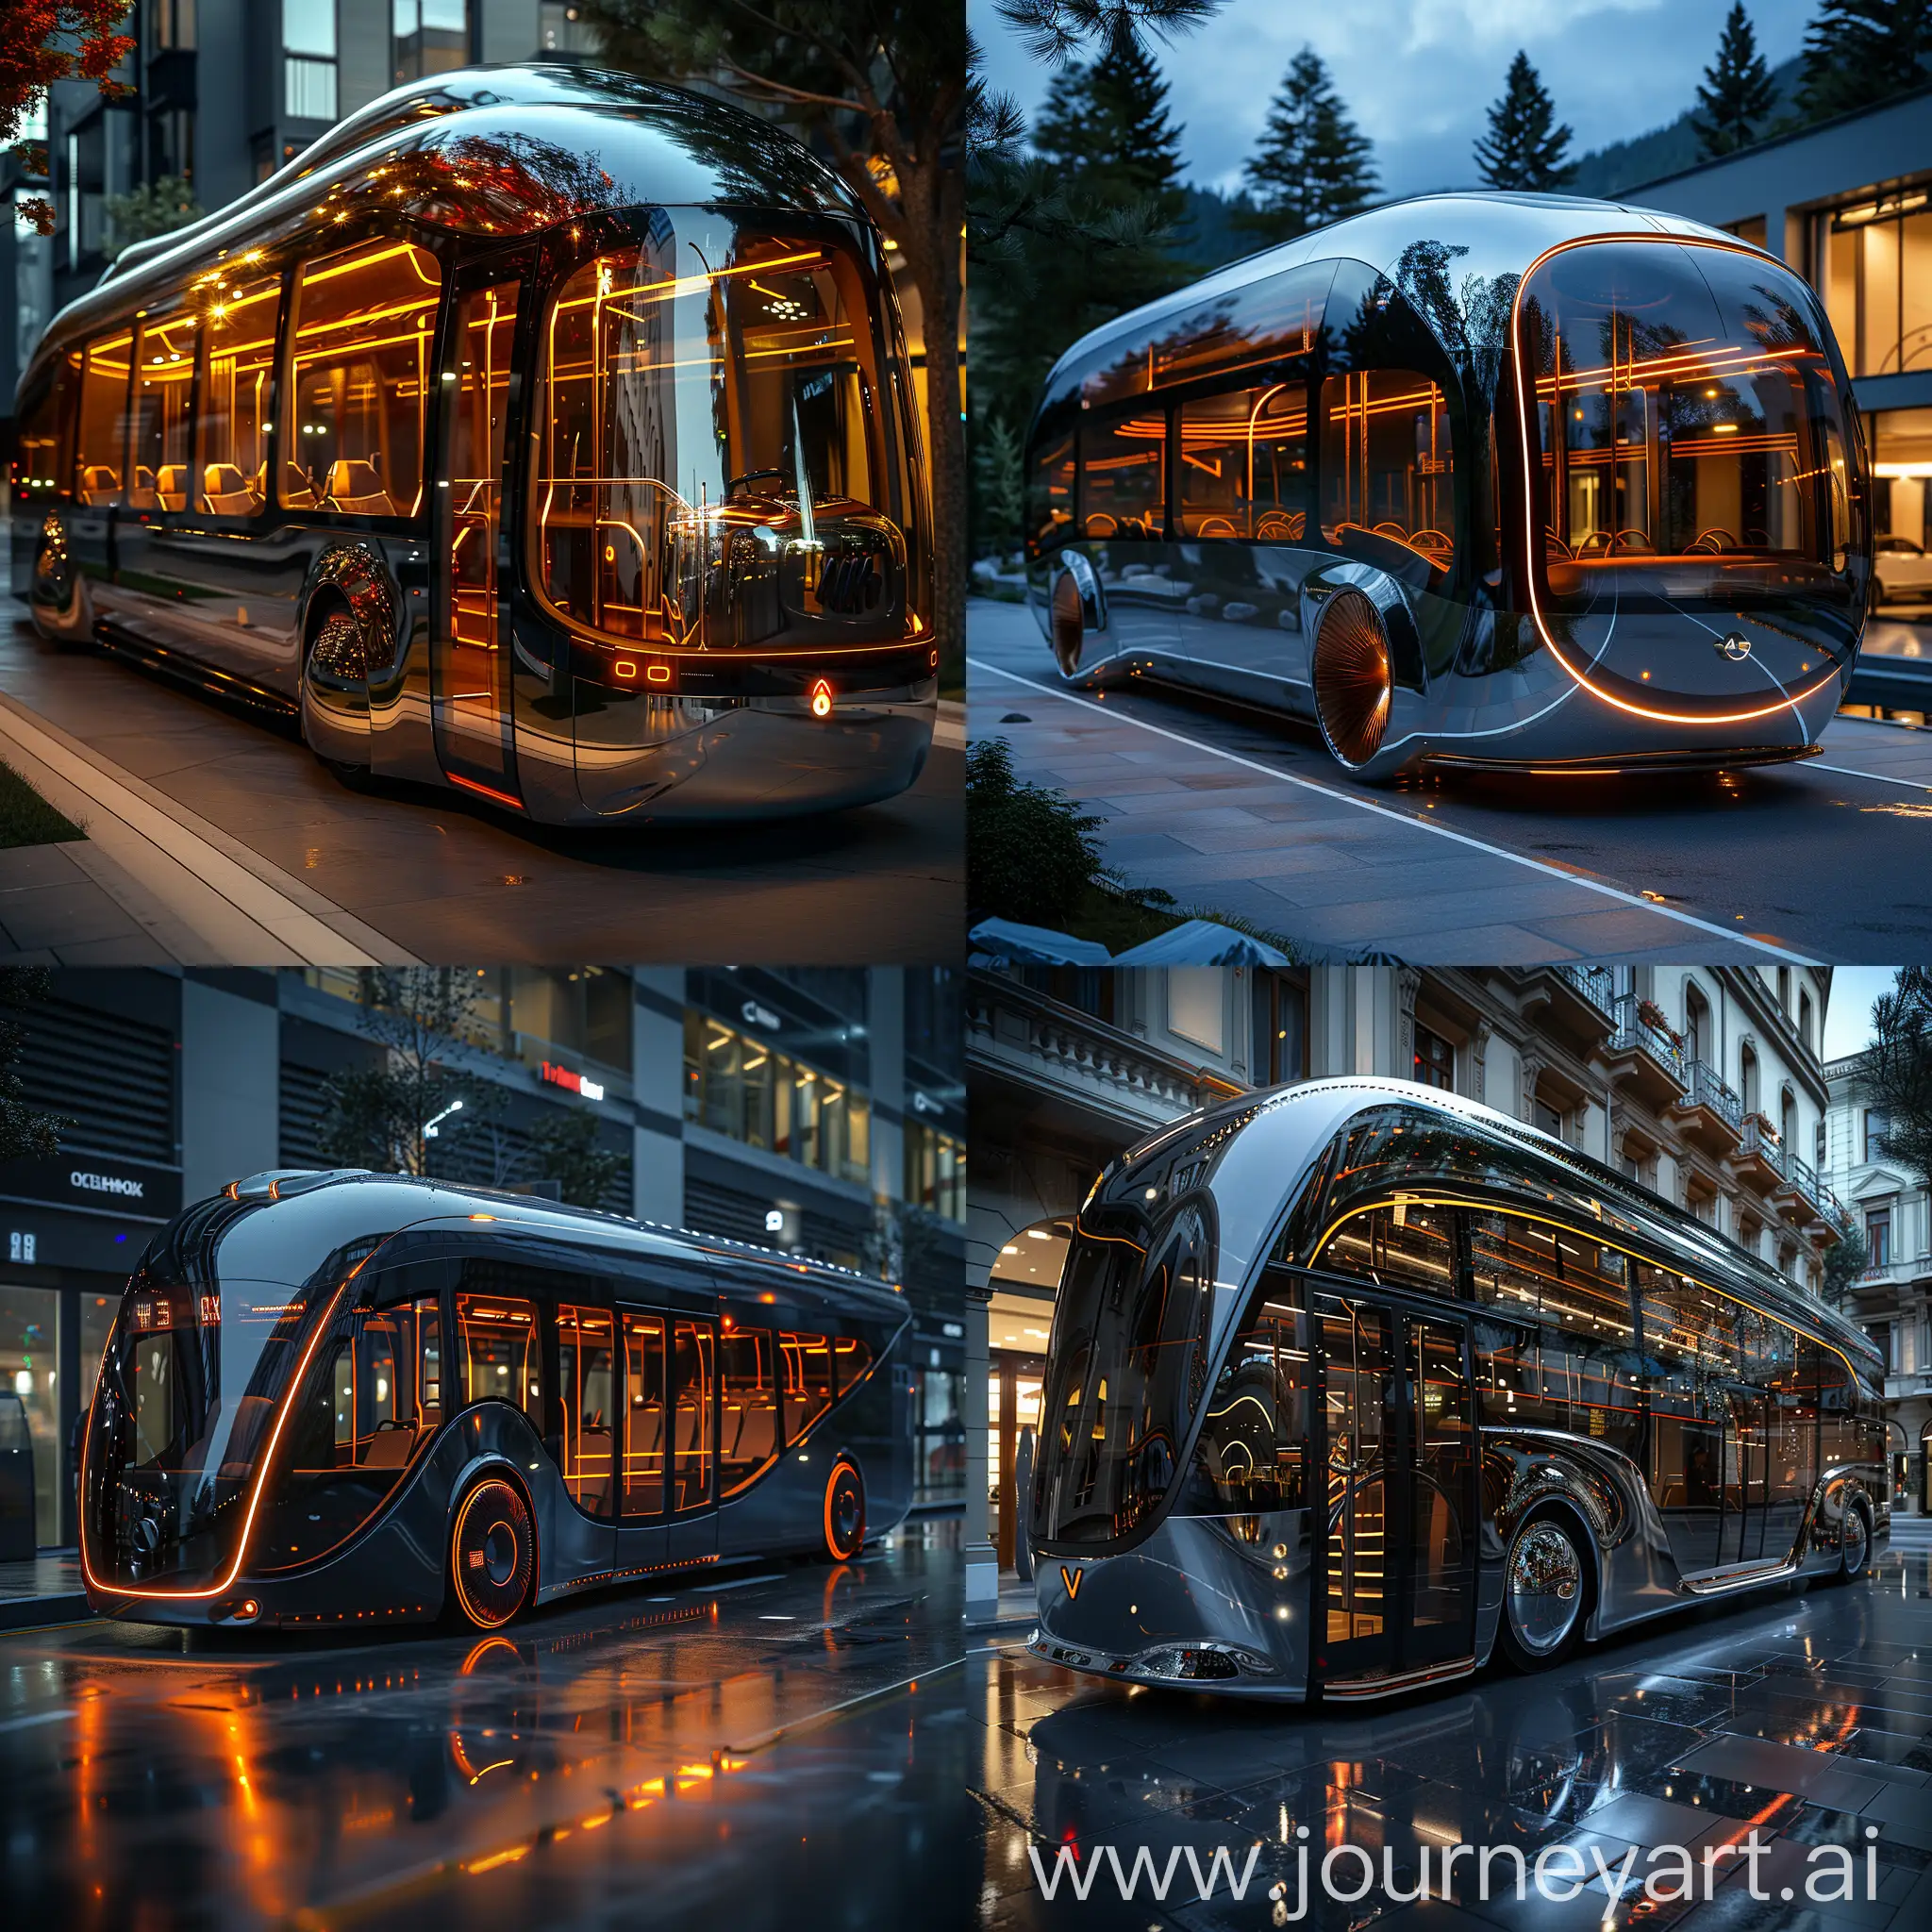 Futuristic-Stainless-Steel-Bus-with-Smart-Materials-and-High-Tech-Features